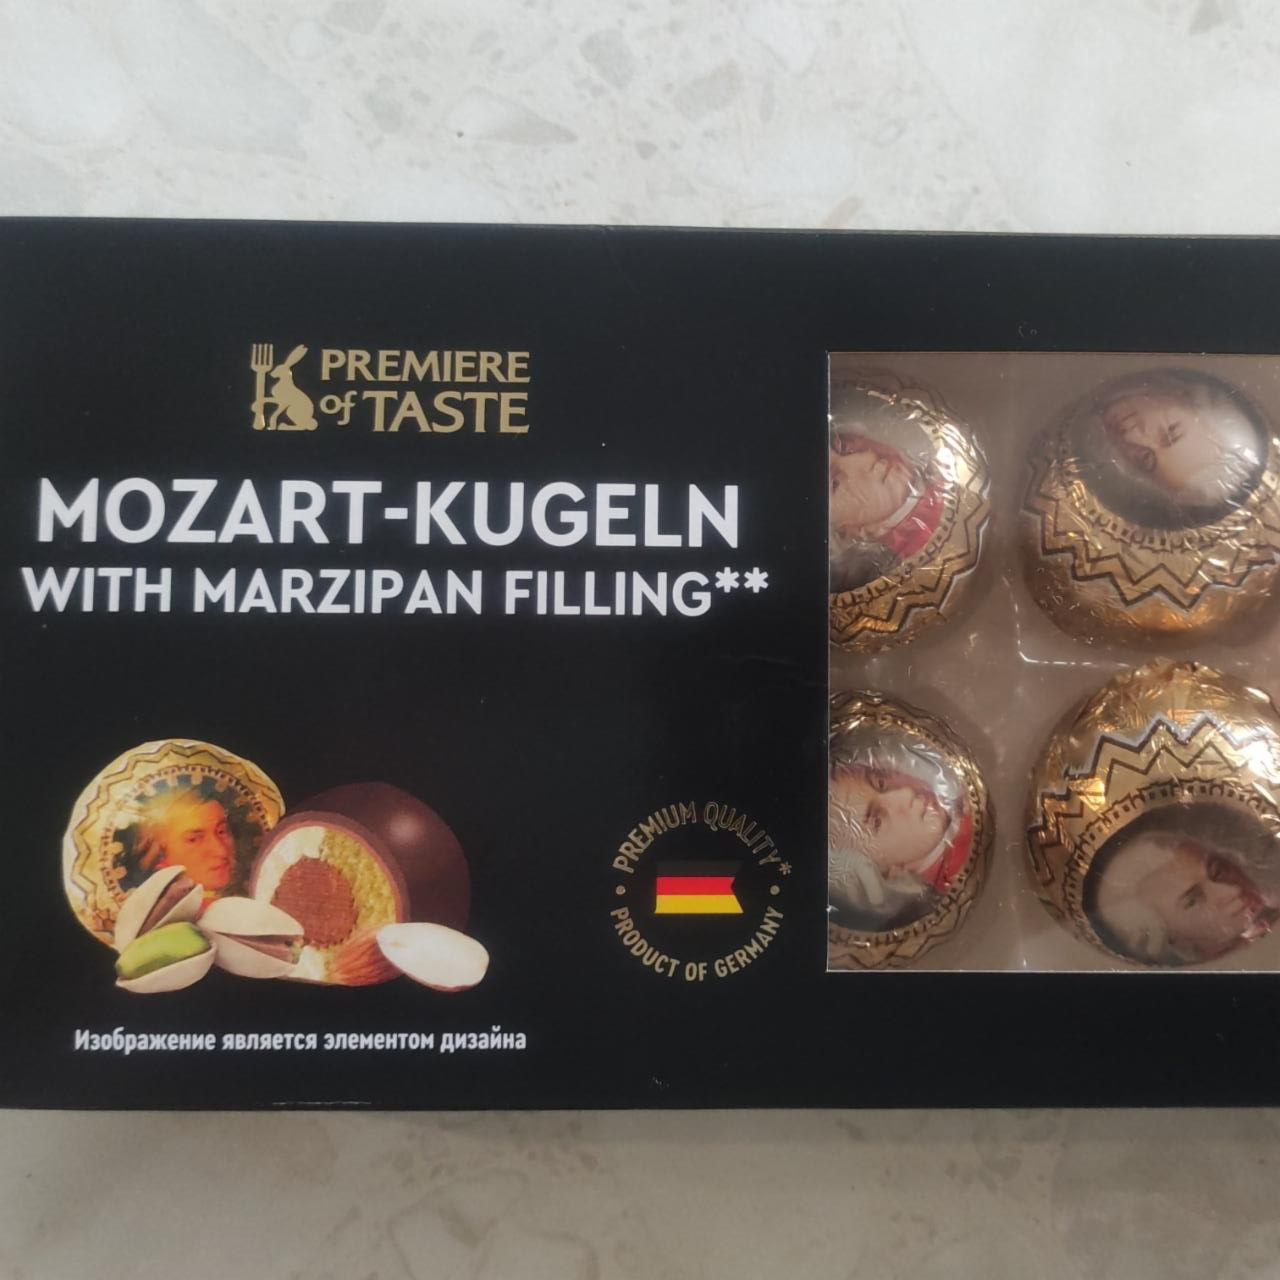 Фото - Mozart-kugeln with marzipan filling Premiere of taste